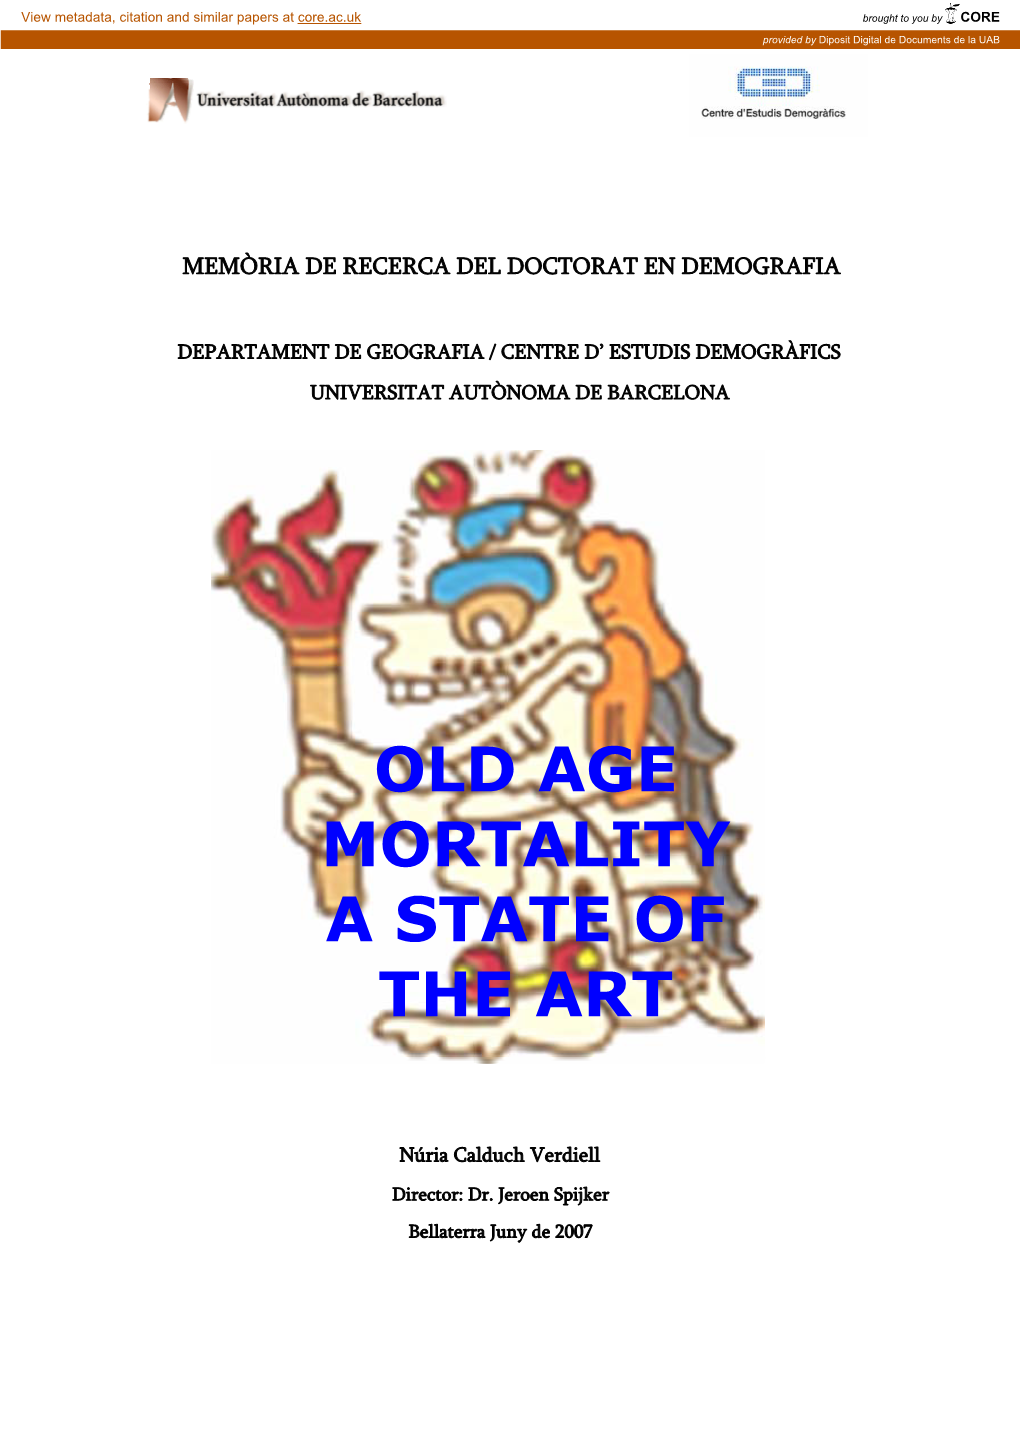 Old Age Mortality a State of the Art